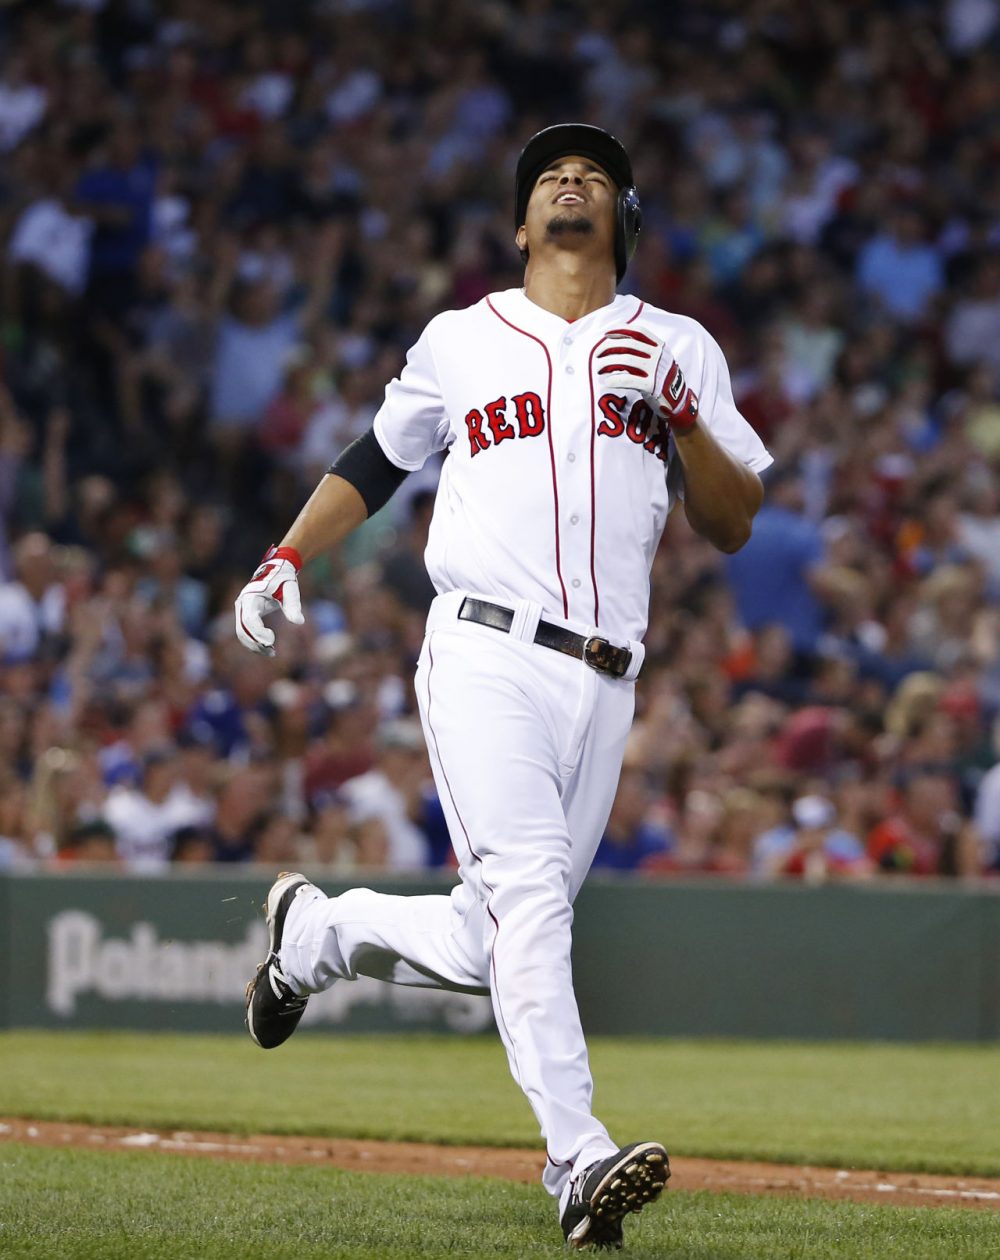 Boston Red Sox's Xander Bogaerts reacts after his deep fly was caught in the fourth inning of a baseball game against the Chicago Cubs at Fenway Park in Boston on Tuesday. (Elise Amendola/AP)